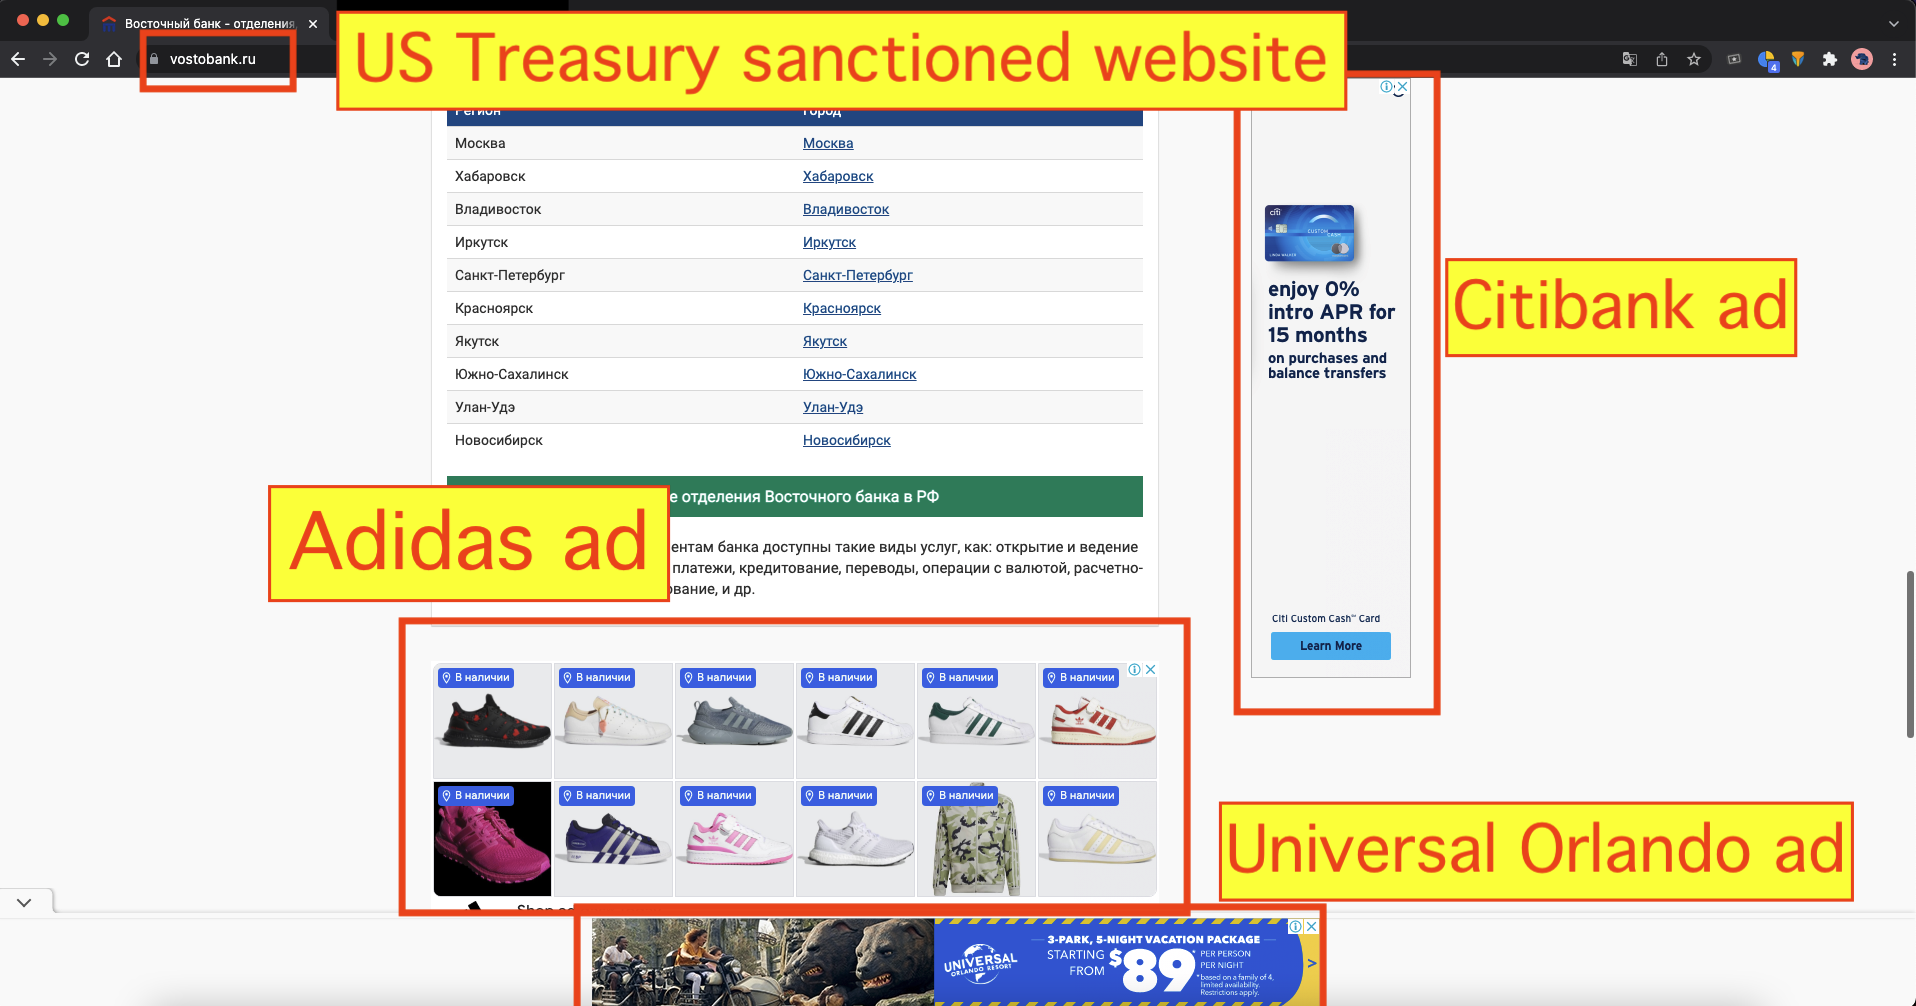 adidas and citibank ads on a US Treasury sanctioned Russian websites